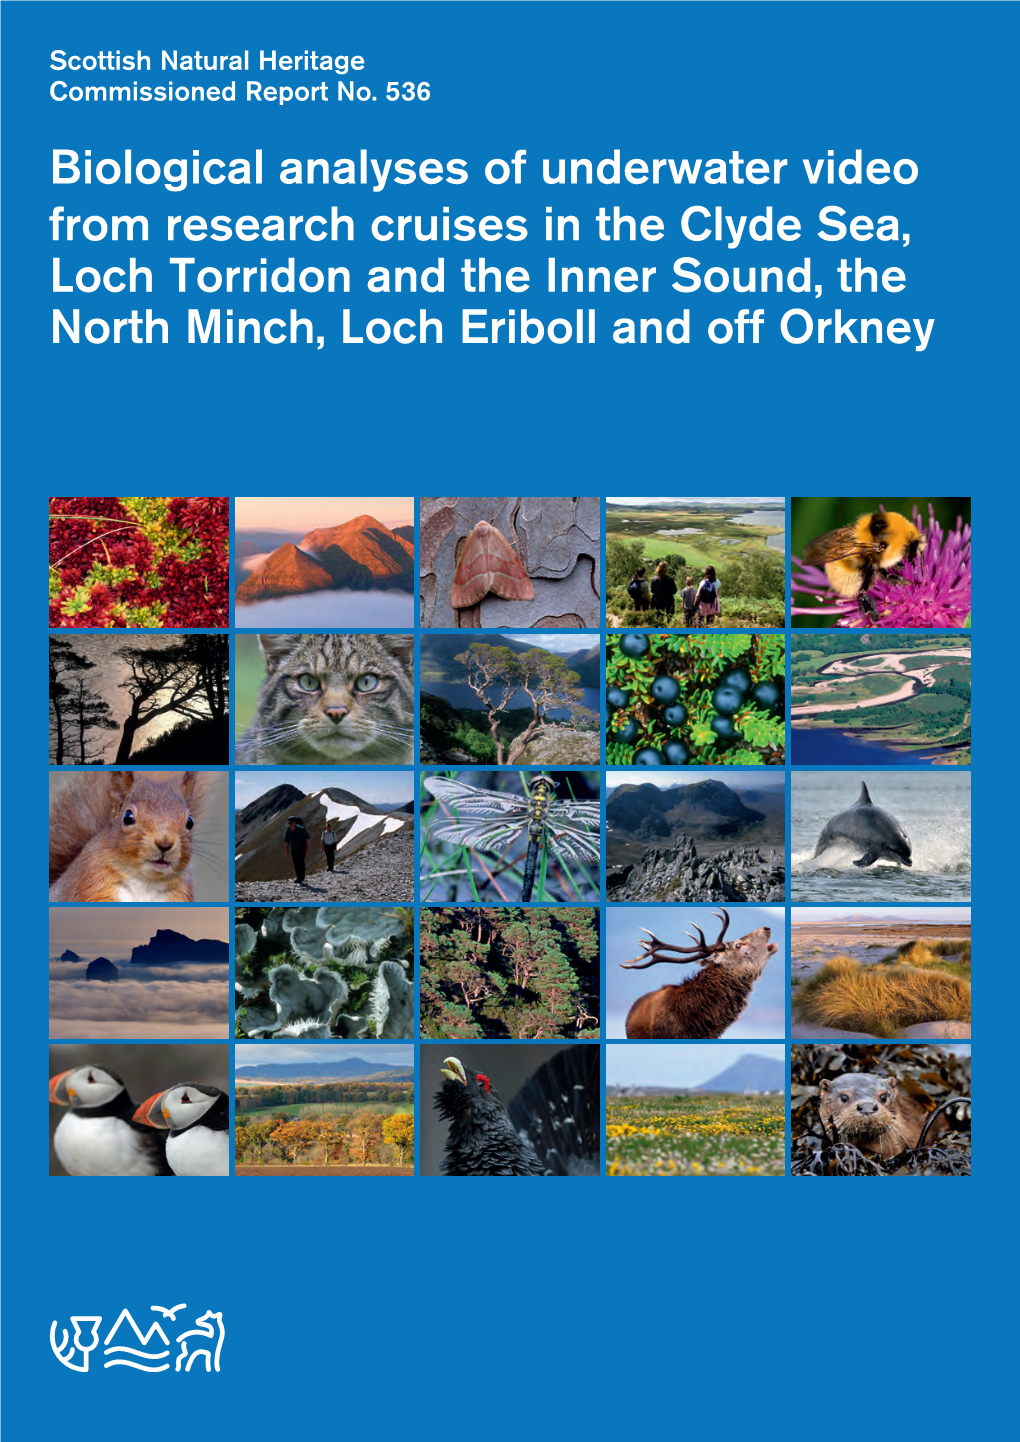 Biological Analyses of Underwater Video from Research Cruises in the Clyde Sea, Loch Torridon and the Inner Sound, the North Minch, Loch Eriboll and Off Orkney